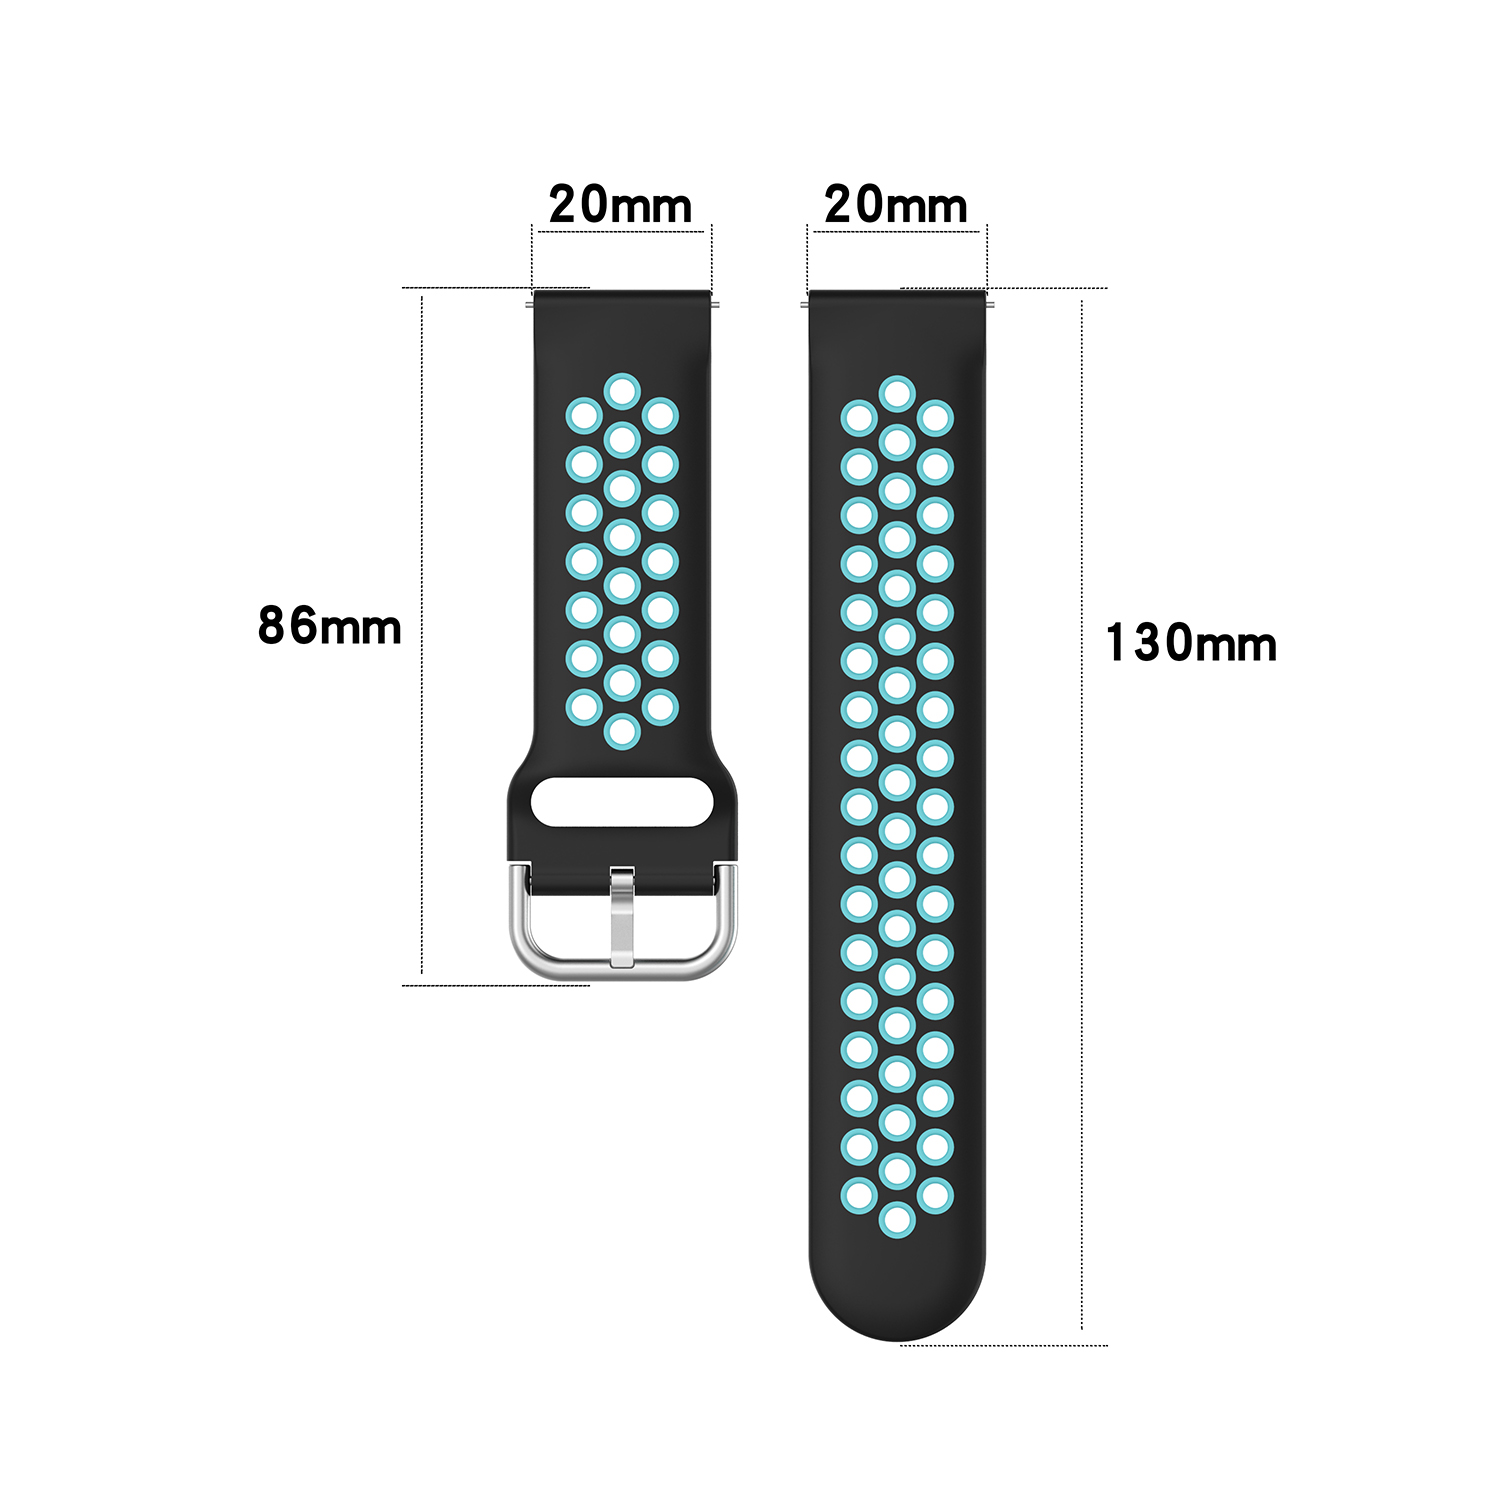 Sport Silicone Breathable Watch Band Band pour Samsung Galaxy S2 S4 Smart Watch Re-Wristban coloré pour Gear Sport